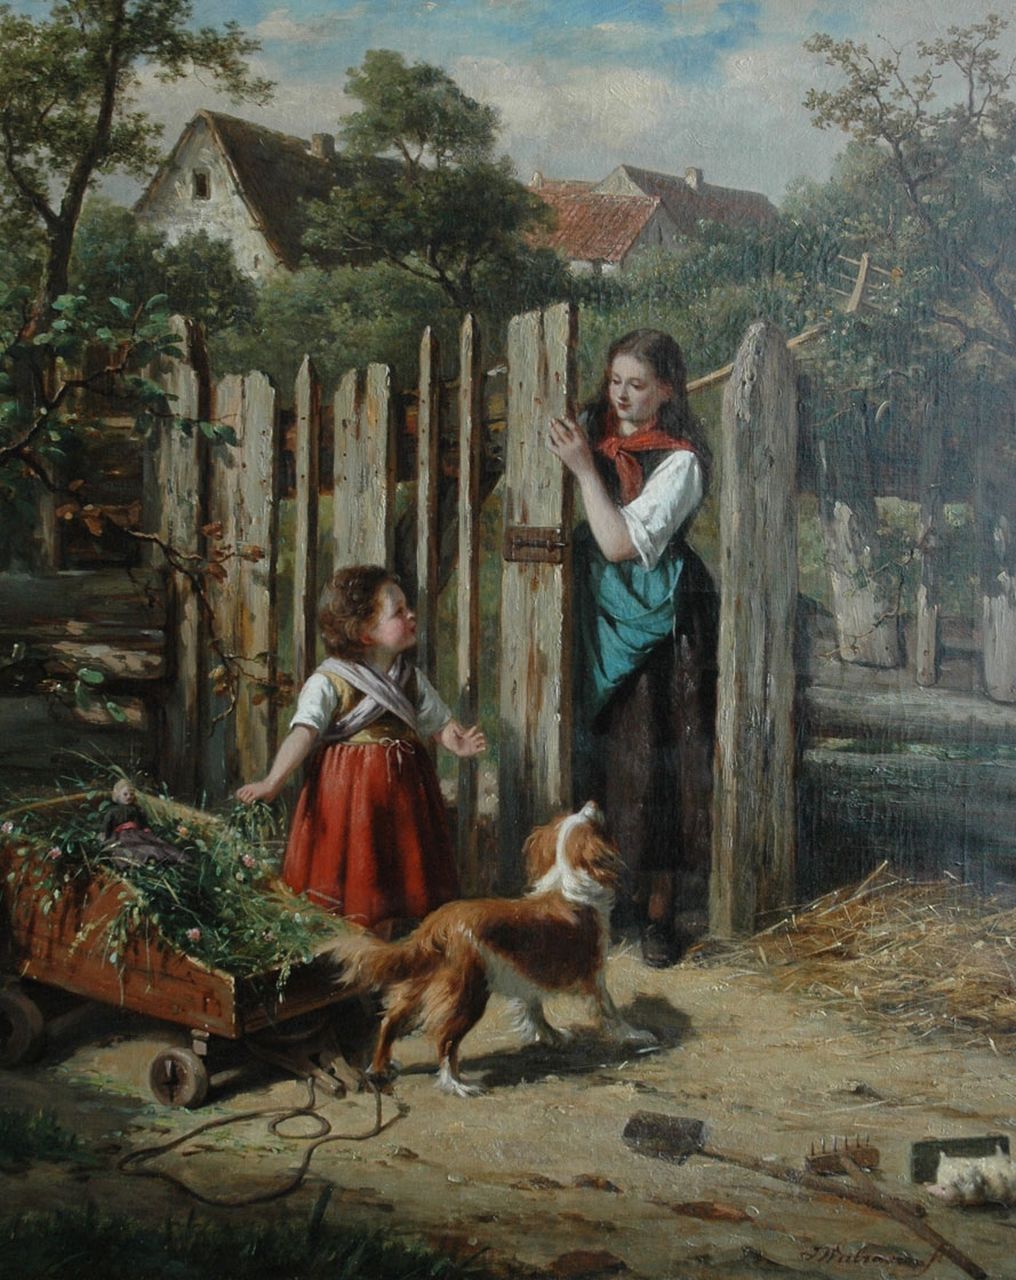 Walraven J.  | Jan Walraven, A playing girl with her dog, Öl auf Leinwand 69,8 x 57,1 cm, signed l.r.